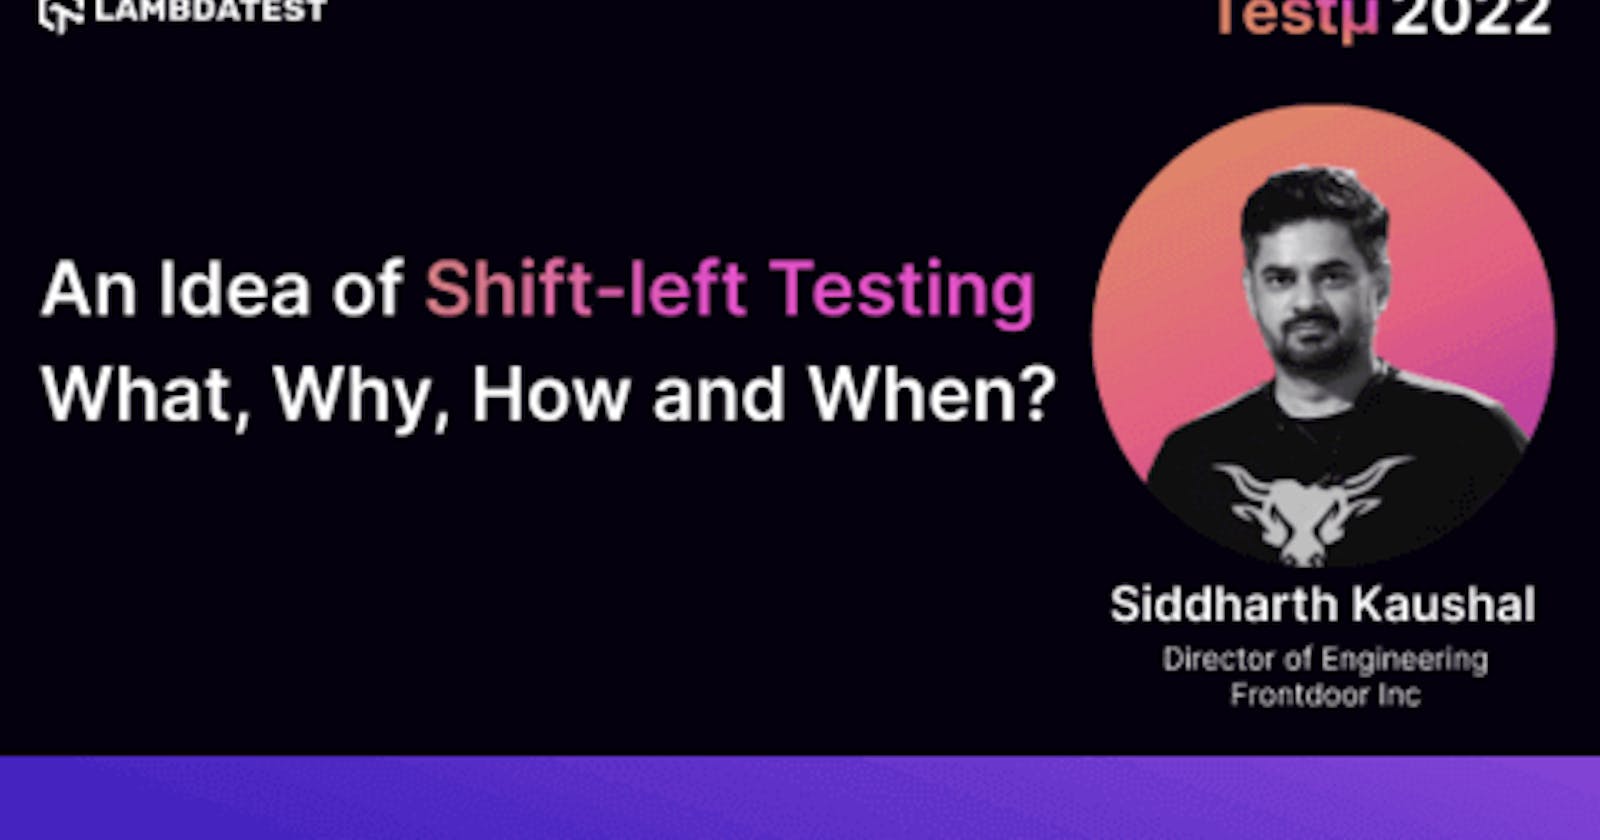 An Idea of Shift-left Testing–What, Why, How, & When?: Siddharth Kaushal [Testμ 2022]